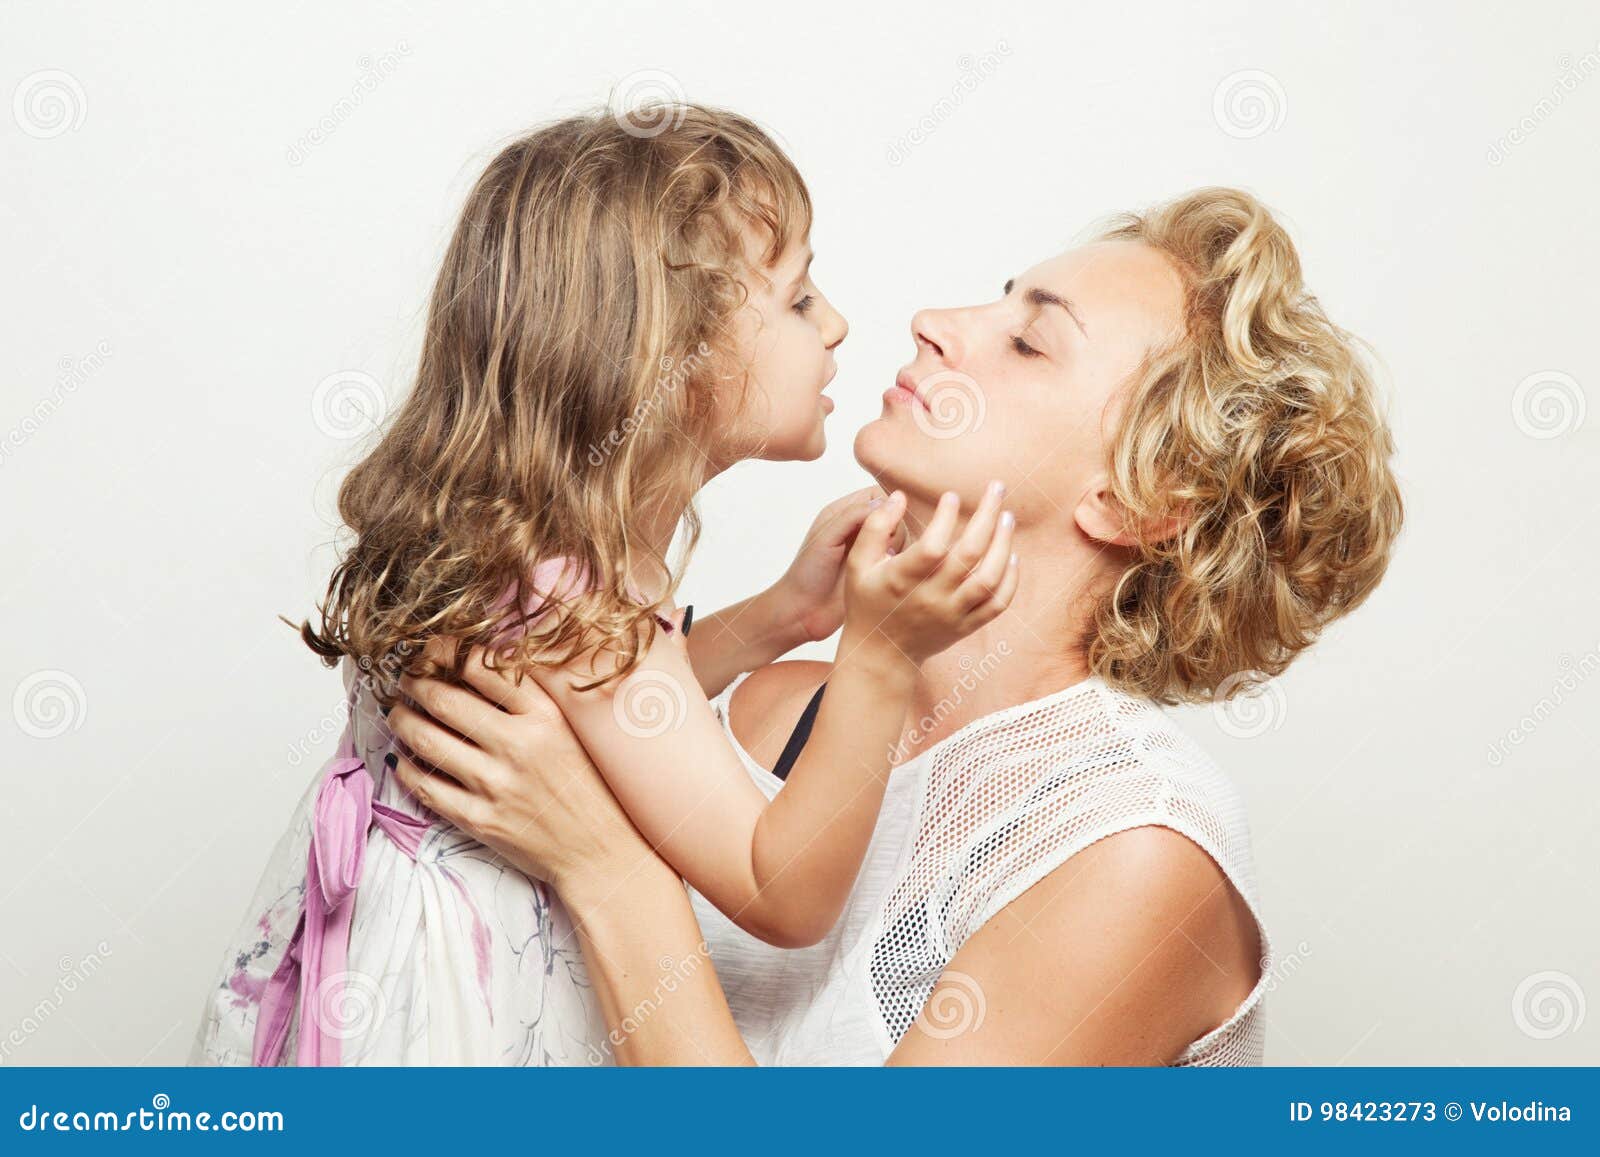 mother and daughter. studio photoshoot. family shoot